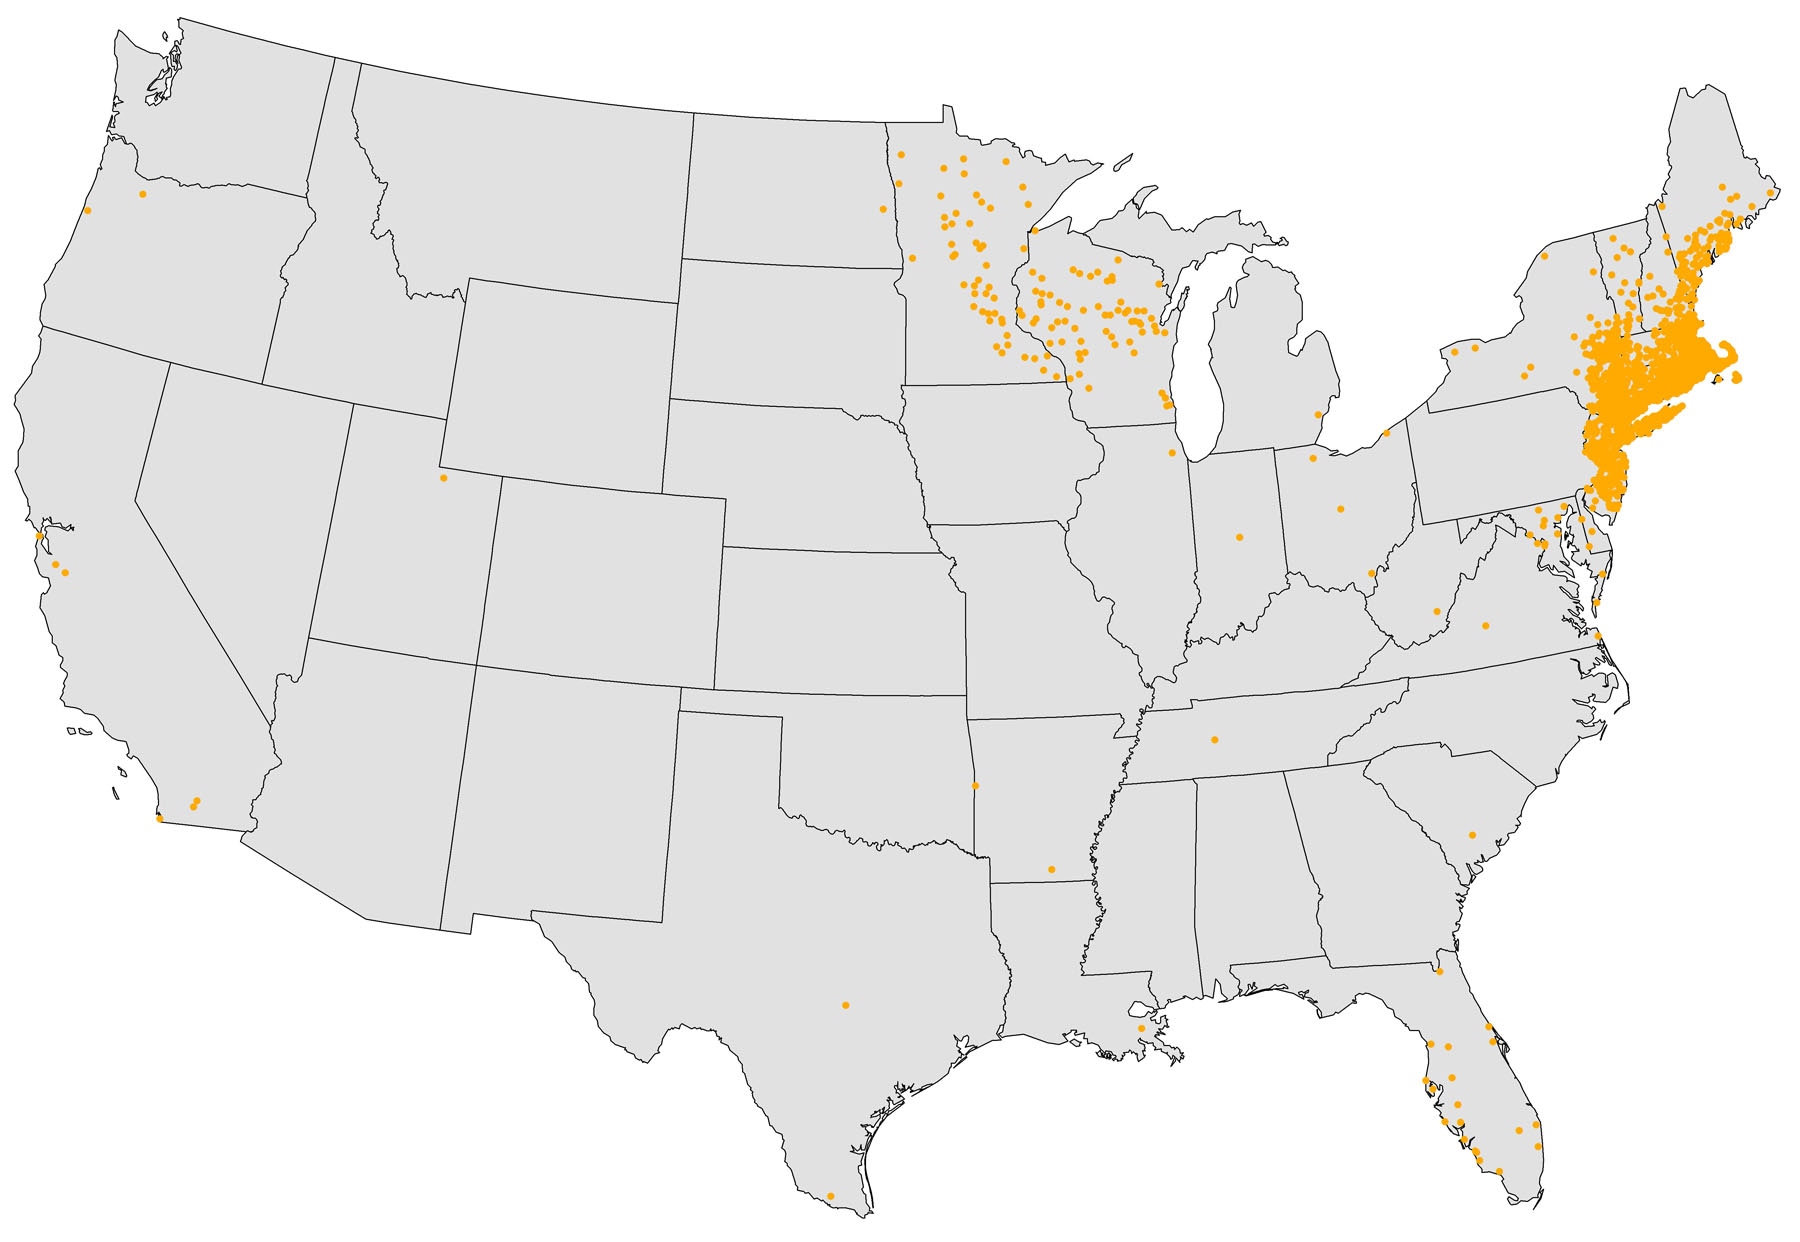 US map showing where cases of Babesiosis have been reported. Cases are concentrated in the Northeastern corner of the U.S.